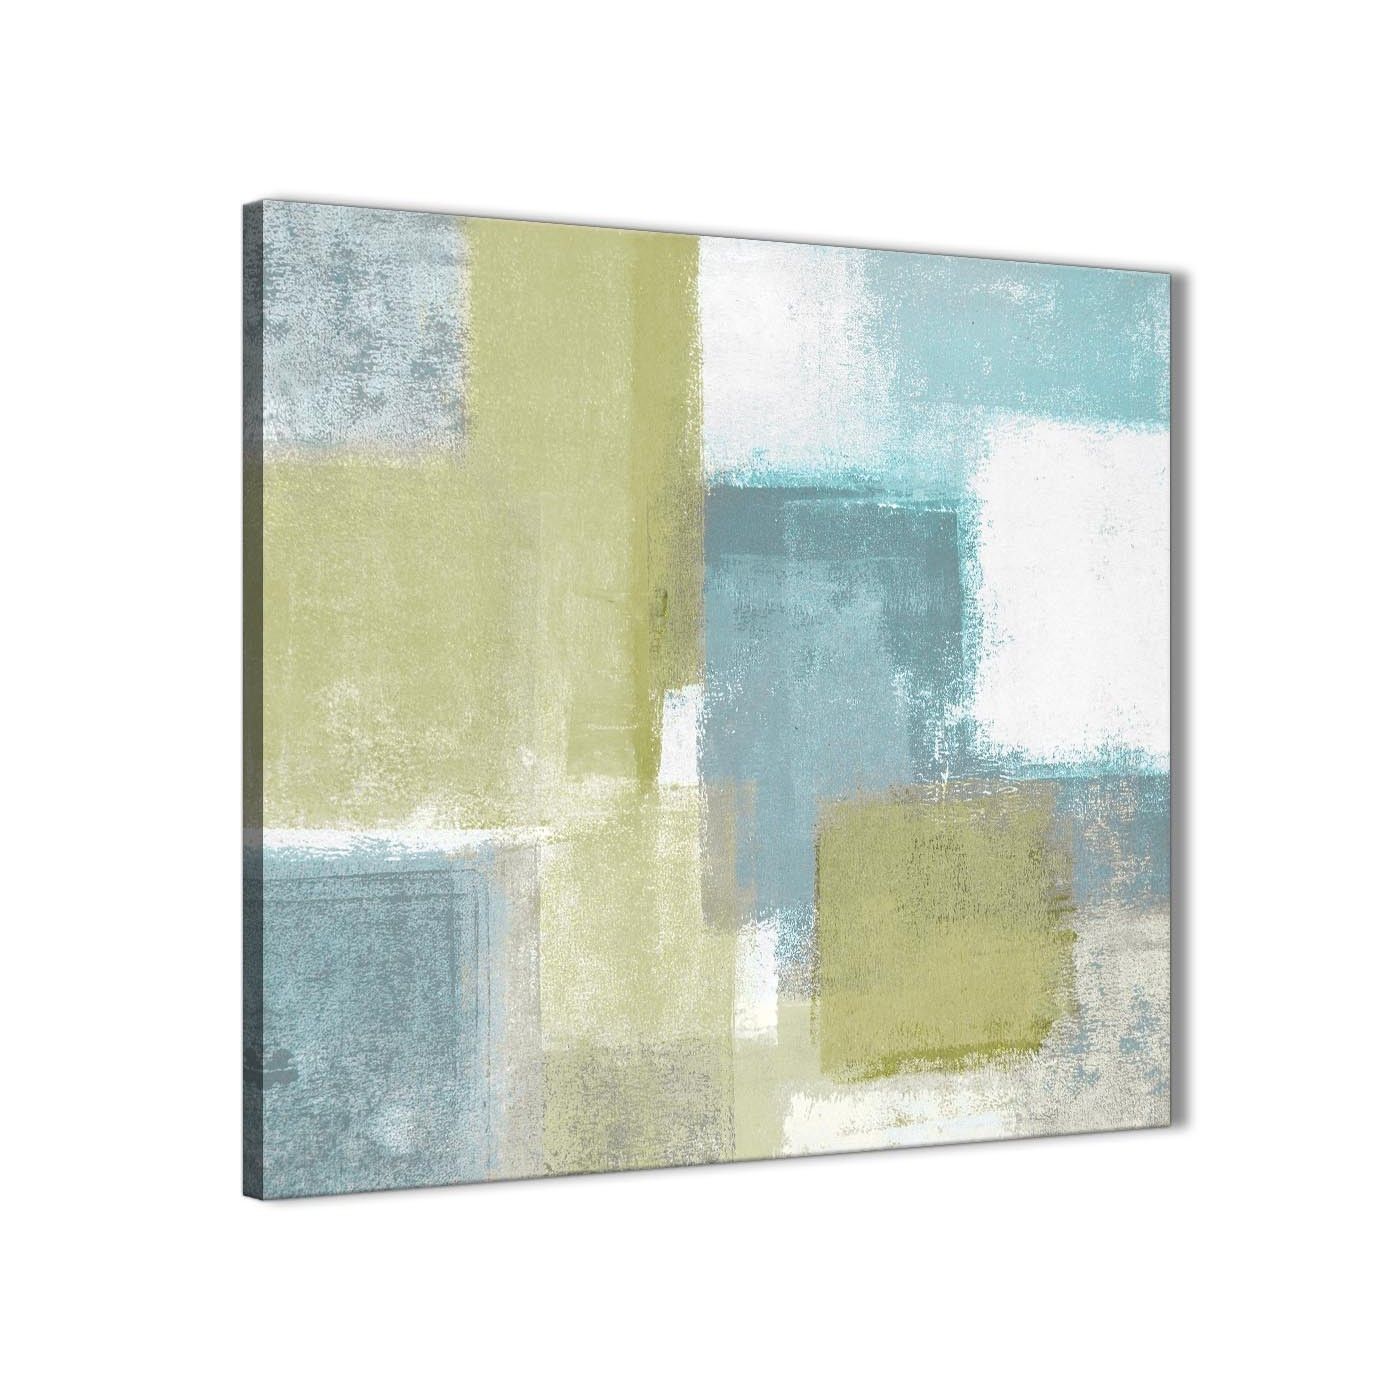 Lime Green Teal Abstract Painting Canvas Wall Art Print – Modern In Recent Oversized Teal Canvas Wall Art (View 5 of 20)